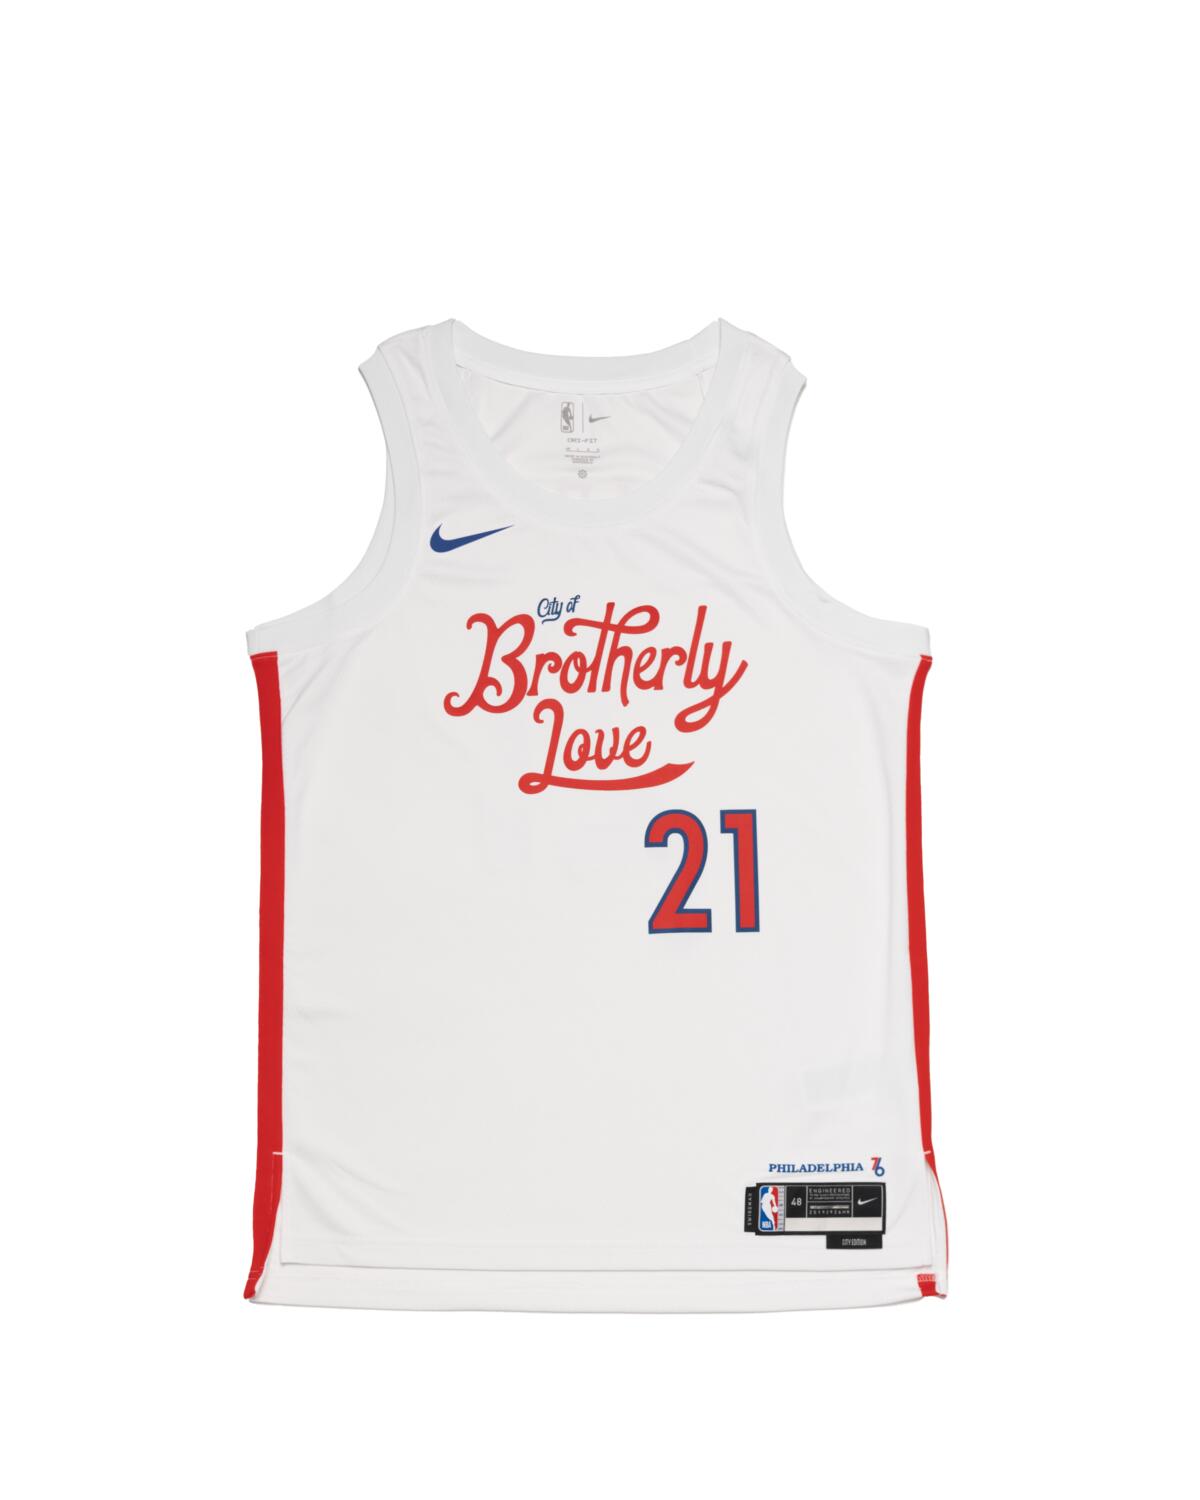 Order your Philadelphia 76ers Nike City Edition gear today